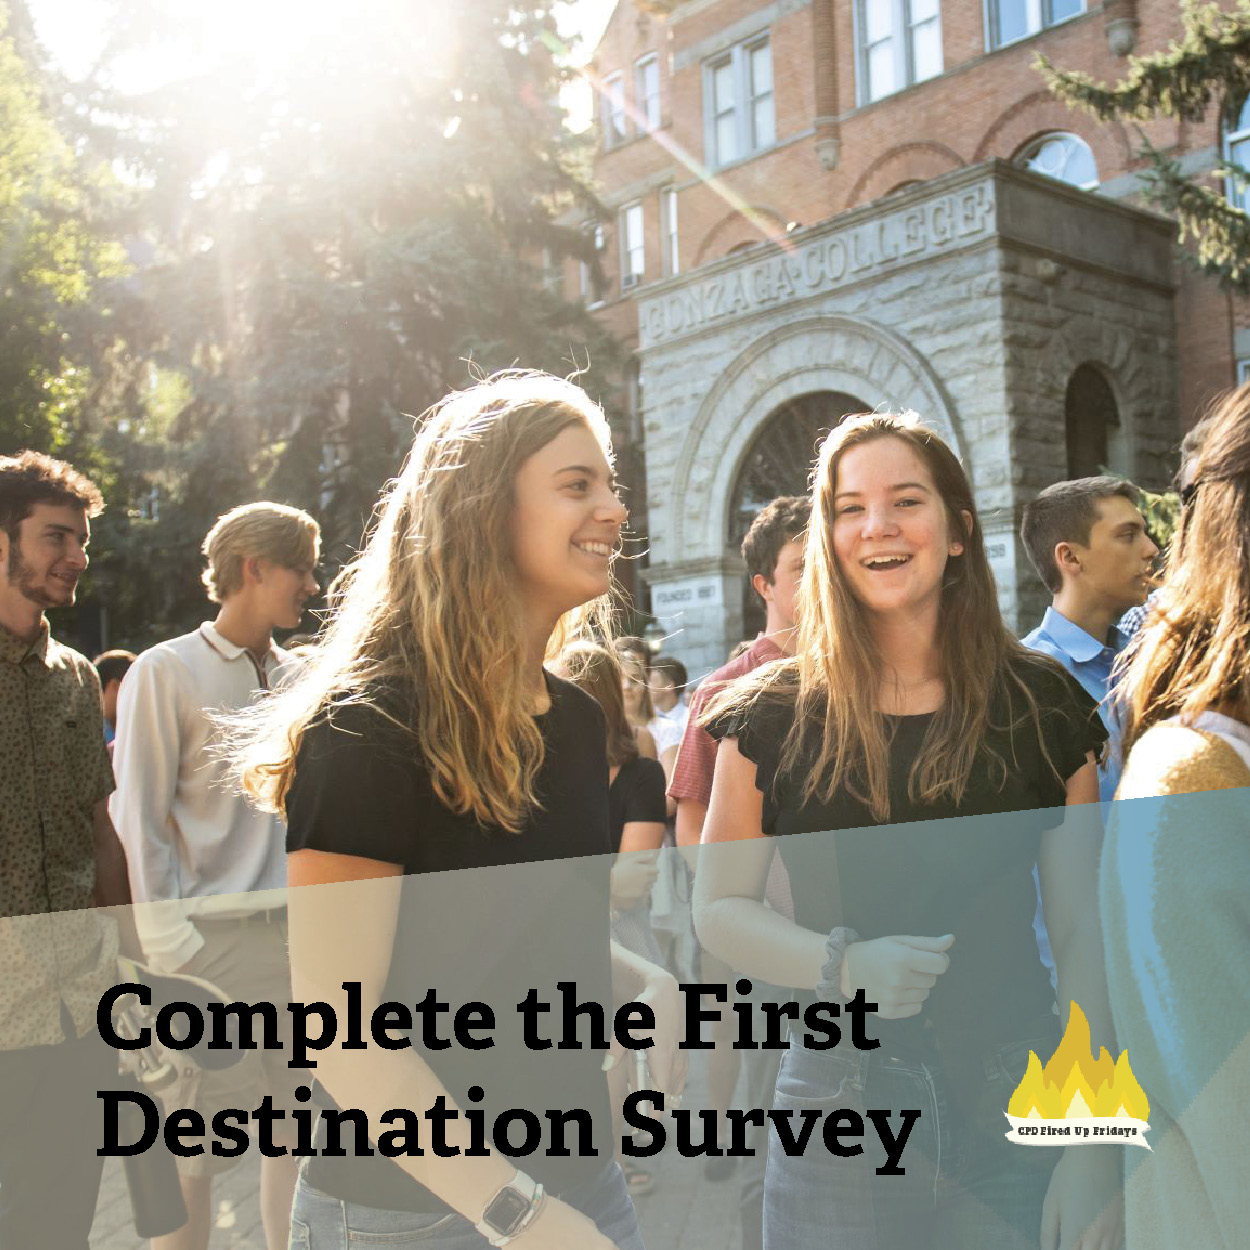 Several students walk past the front of College Hall. The sun shines brightly between the pine trees and the two women closest to the camera smile into the lens. Underneath the photo, text reads: 'Complete the First Destination Survey.'